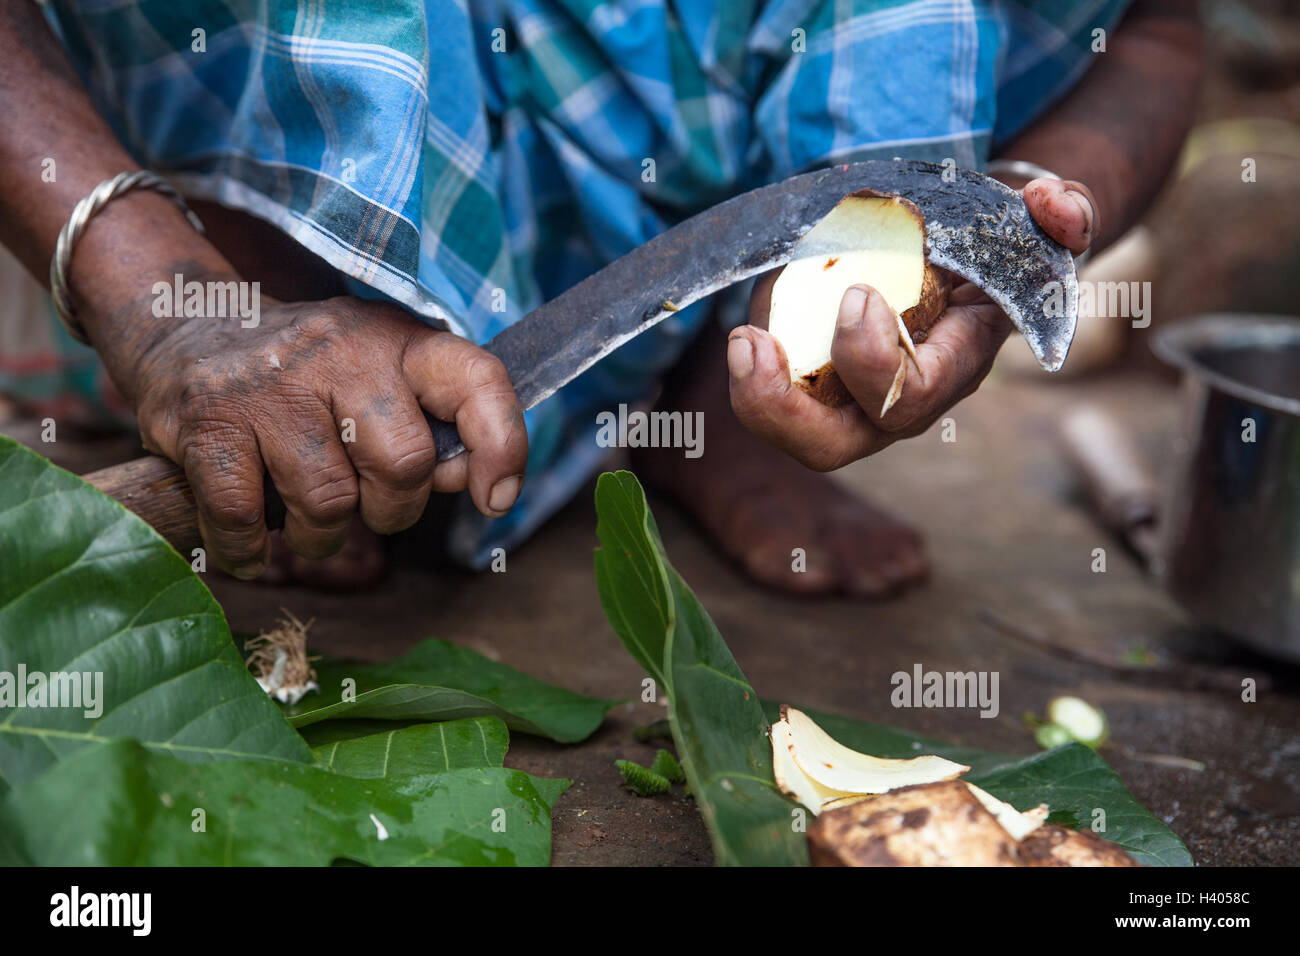 Indigenous Adivasi woman cuts an uncultivated potato with a sickle in Jharkhand, India Stock Photo